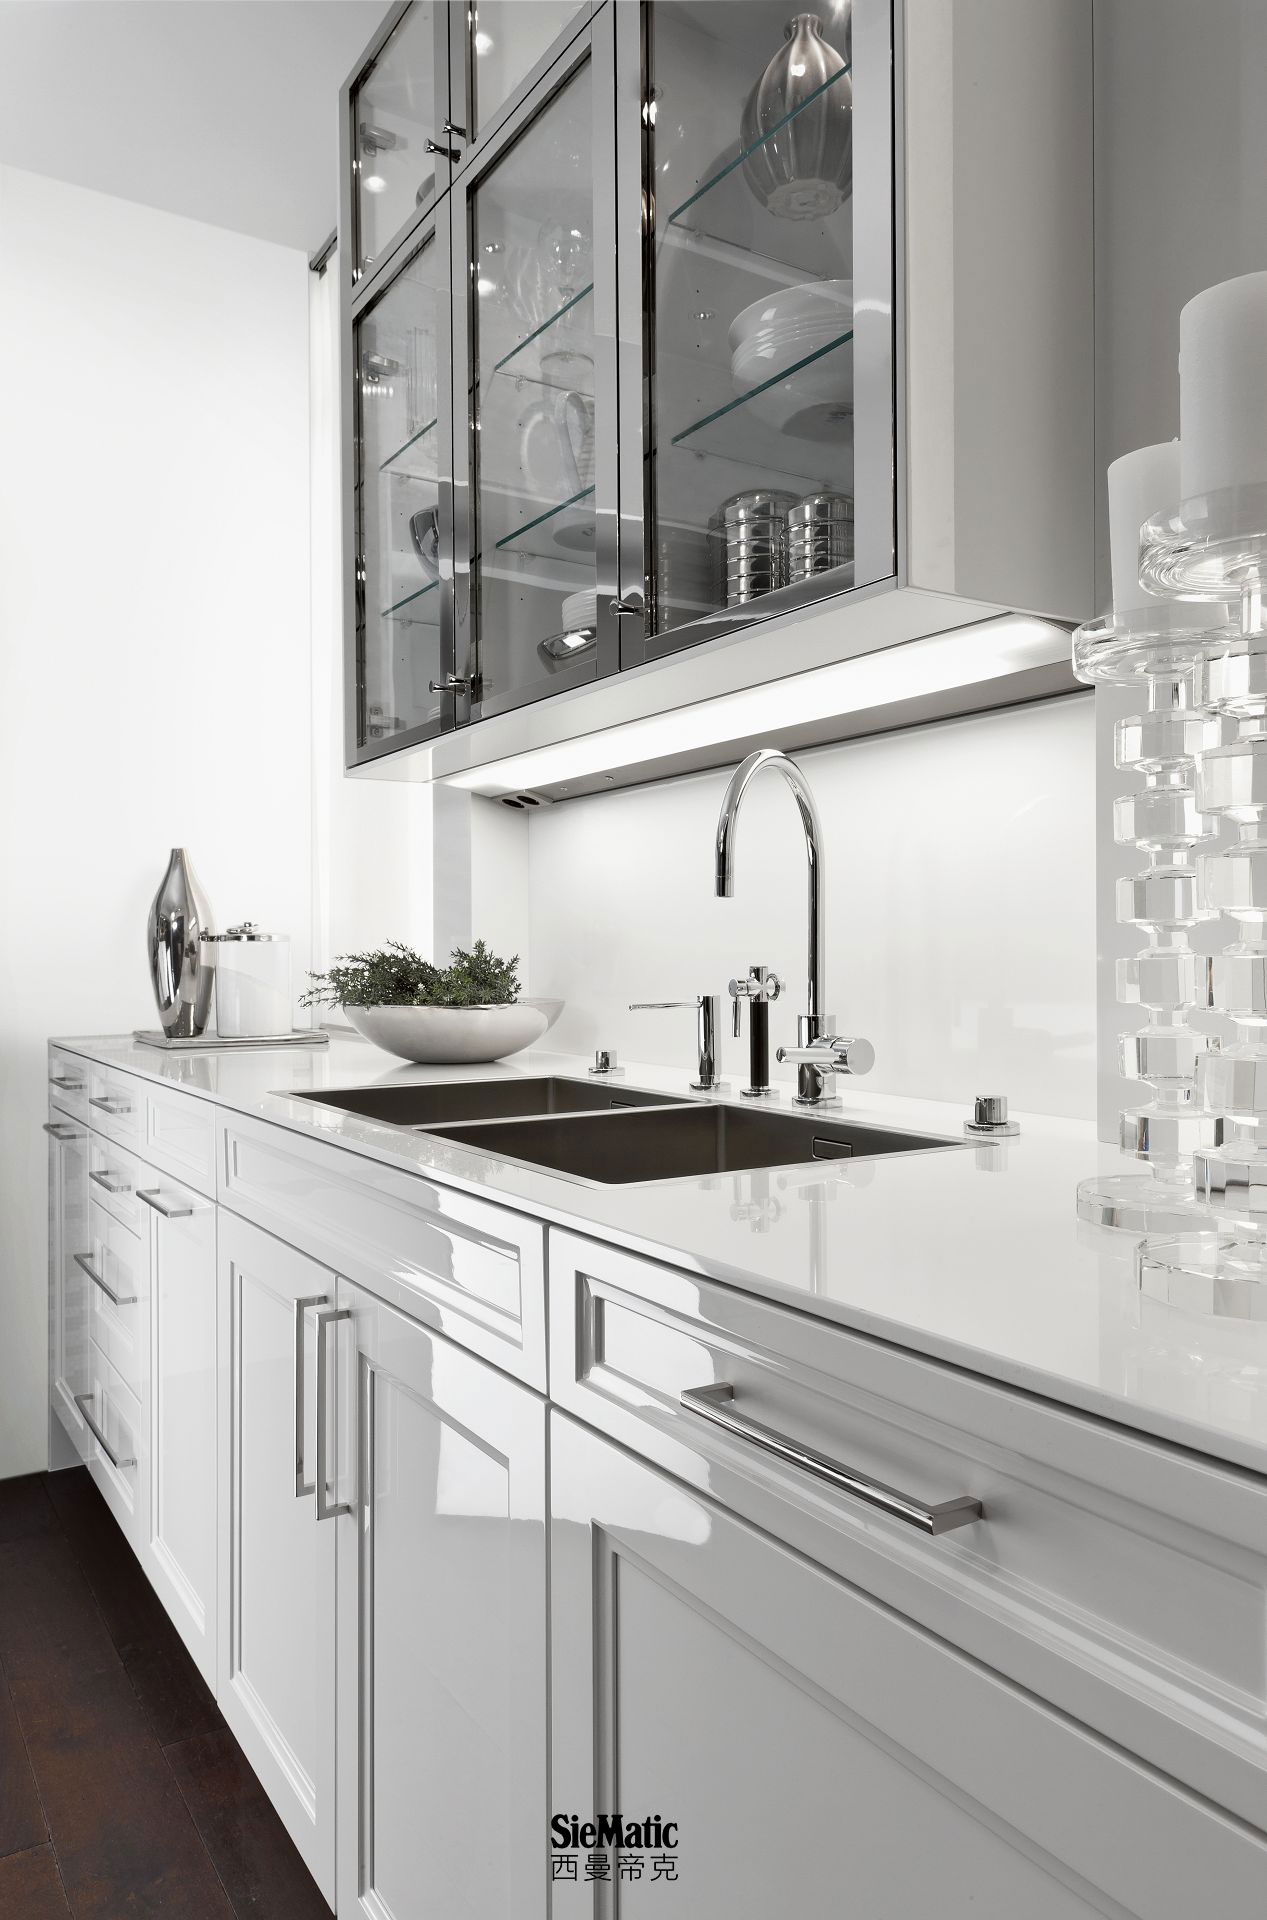 High-quality countertop designs available for classic kitchens of timeless elegance by SieMatic